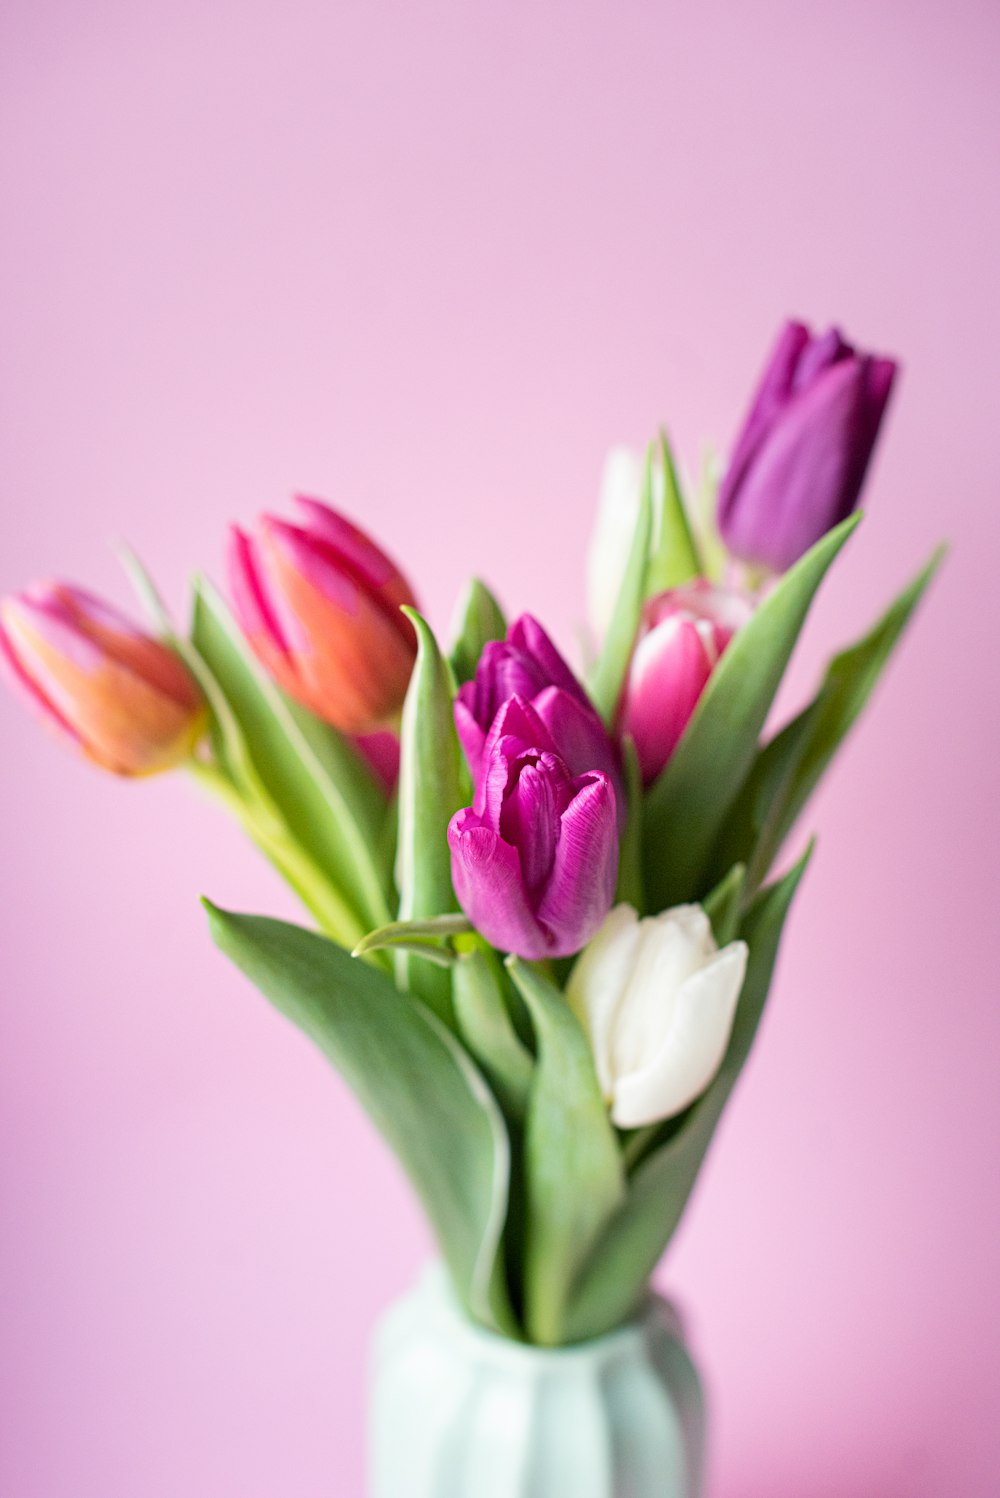 pink and white tulips in bloom